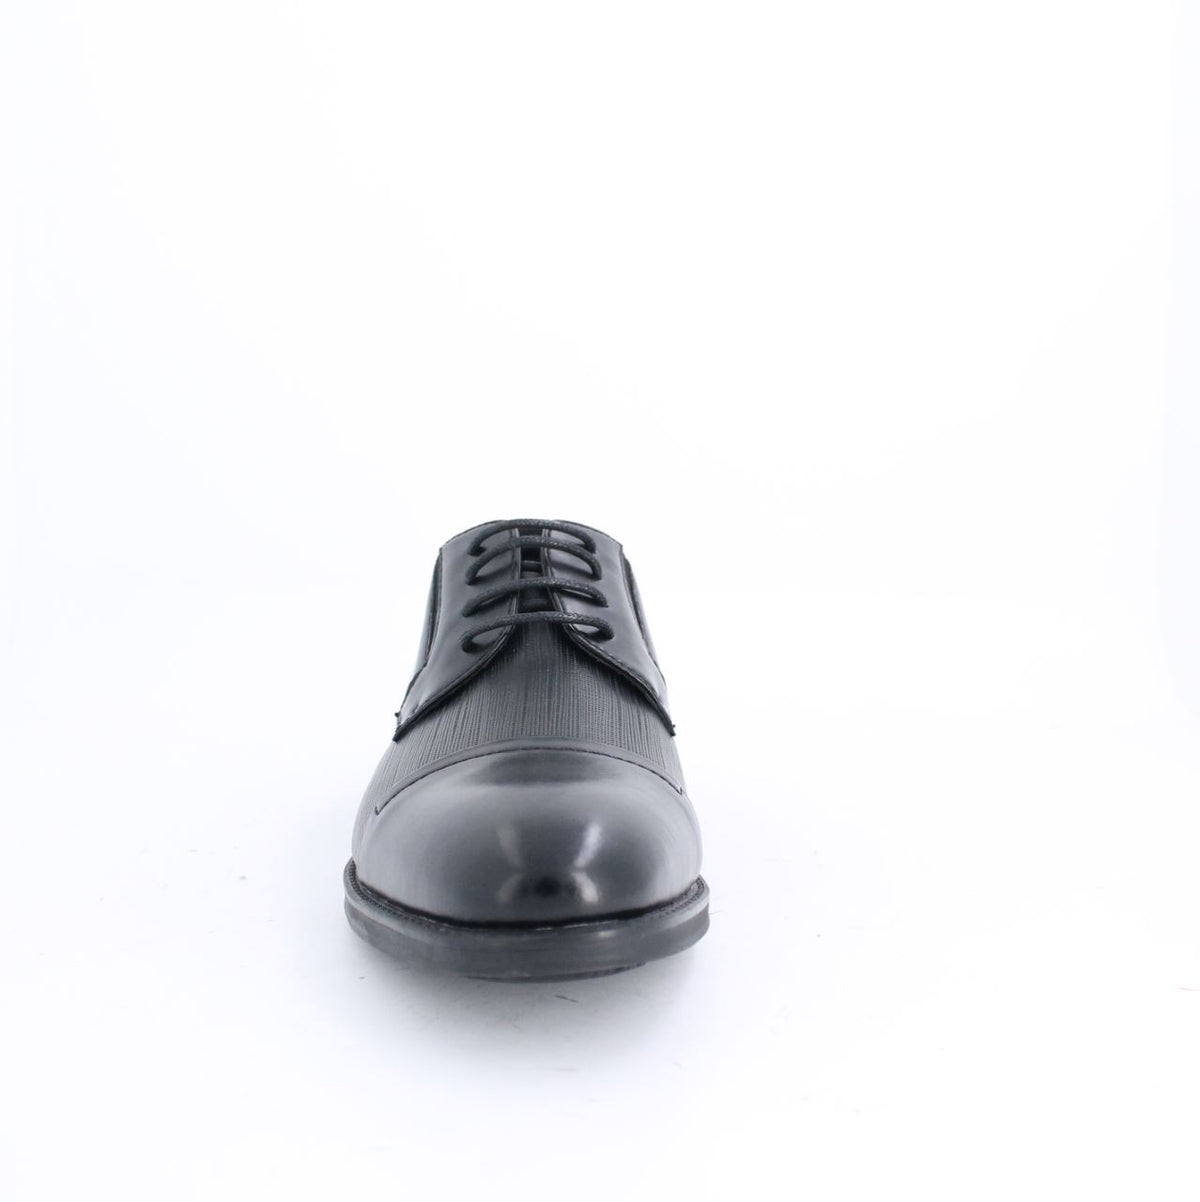 BRODY OXFORD SHOES - BLACK